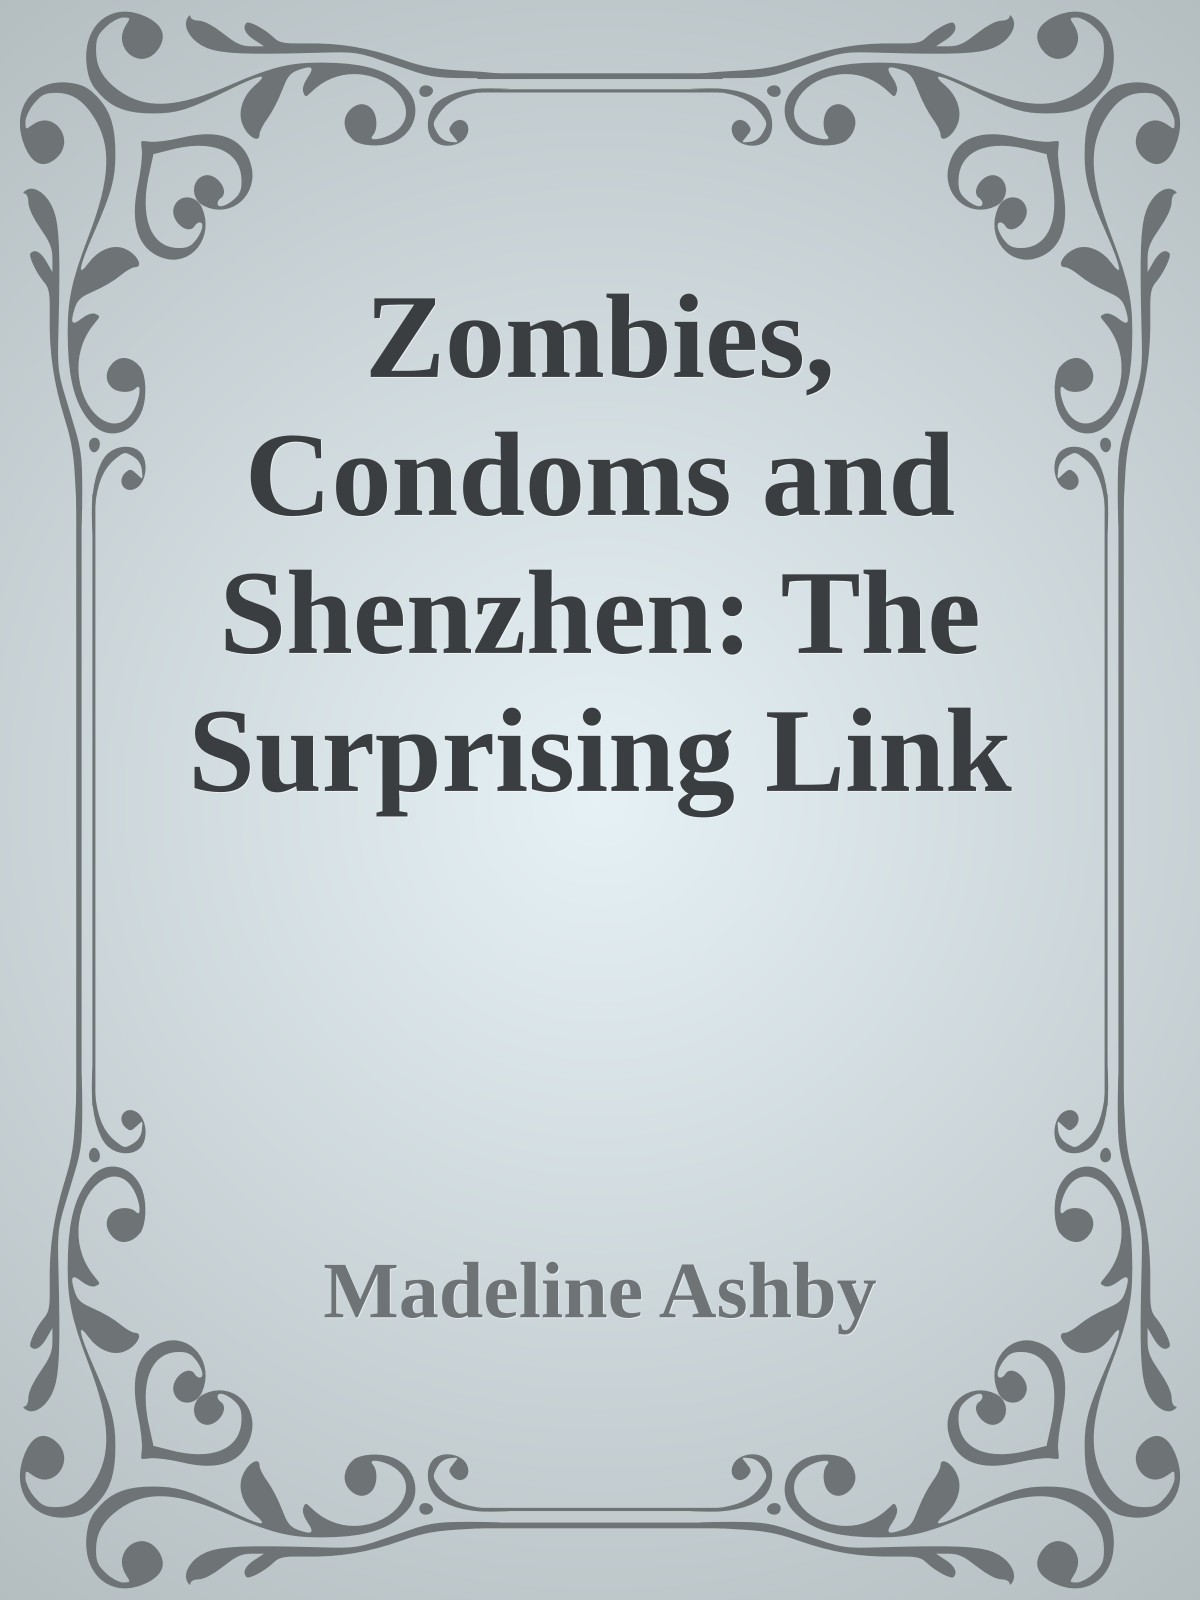 Zombies, Condoms and Shenzhen: The Surprising Link Between the Undead and the Unborn